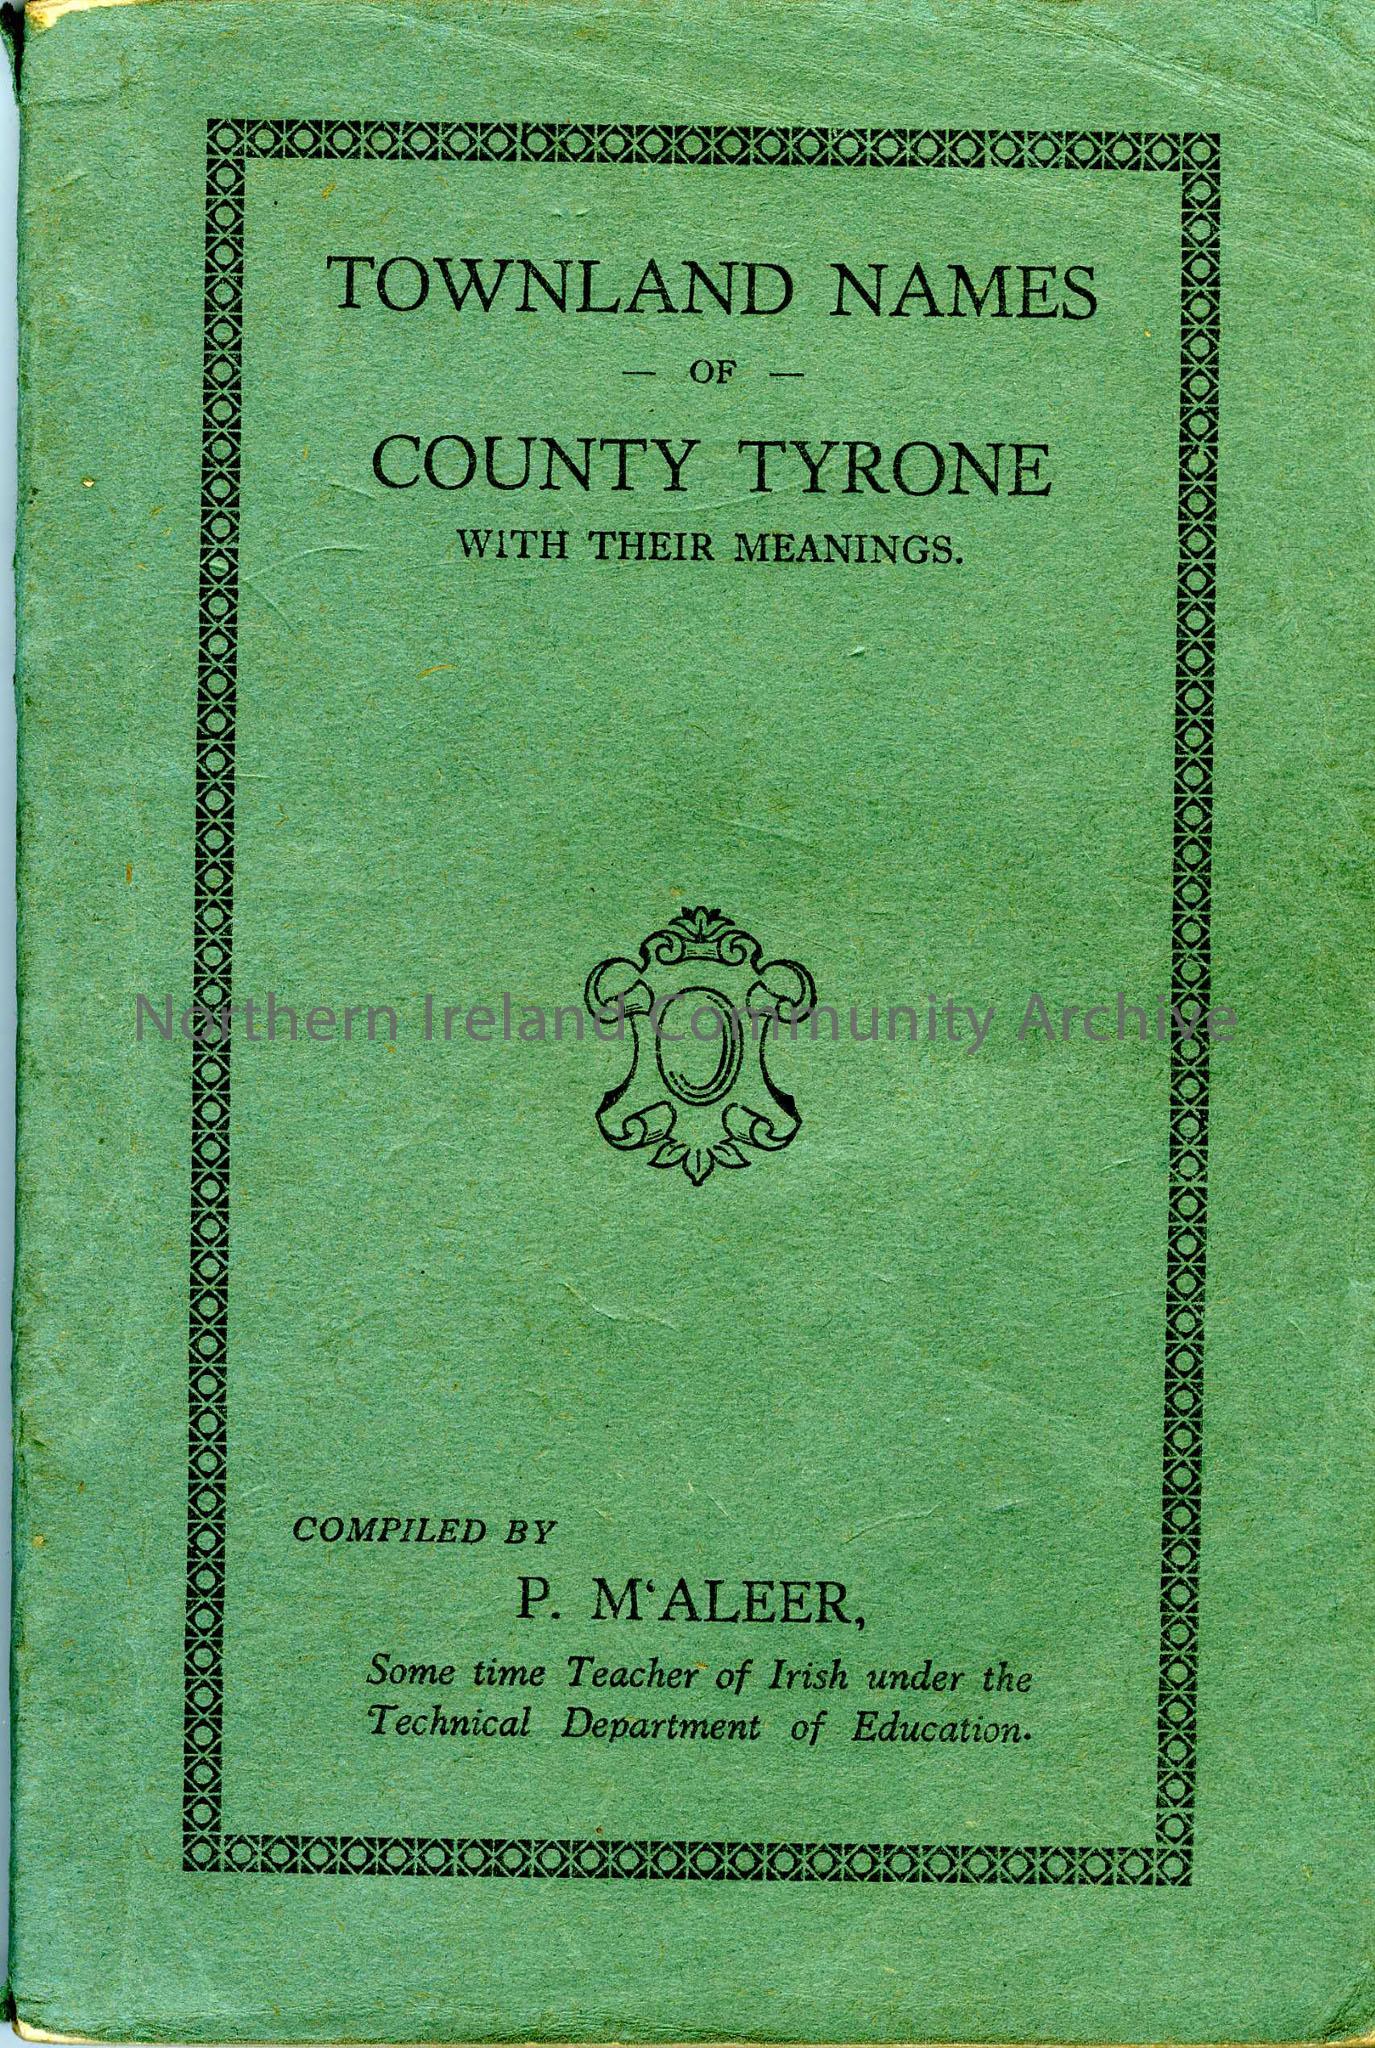 Townland Names of County Tyrone with their Meanings